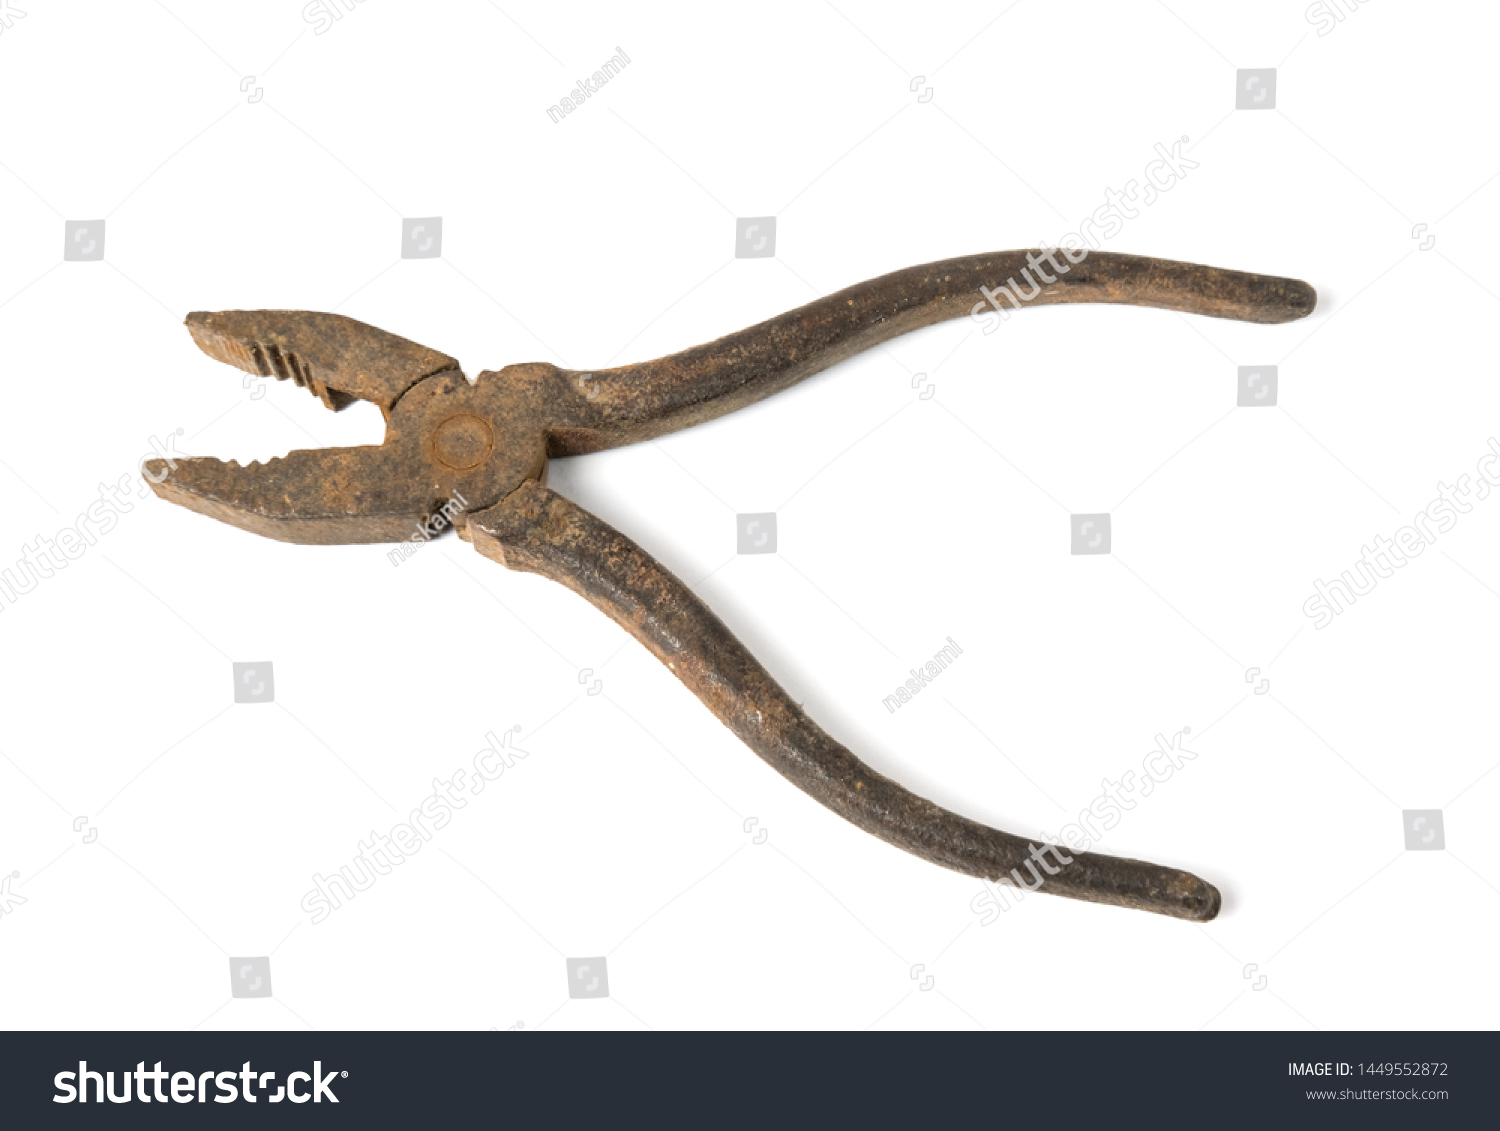 Old metall rusty pliers on a white background, isolated #1449552872